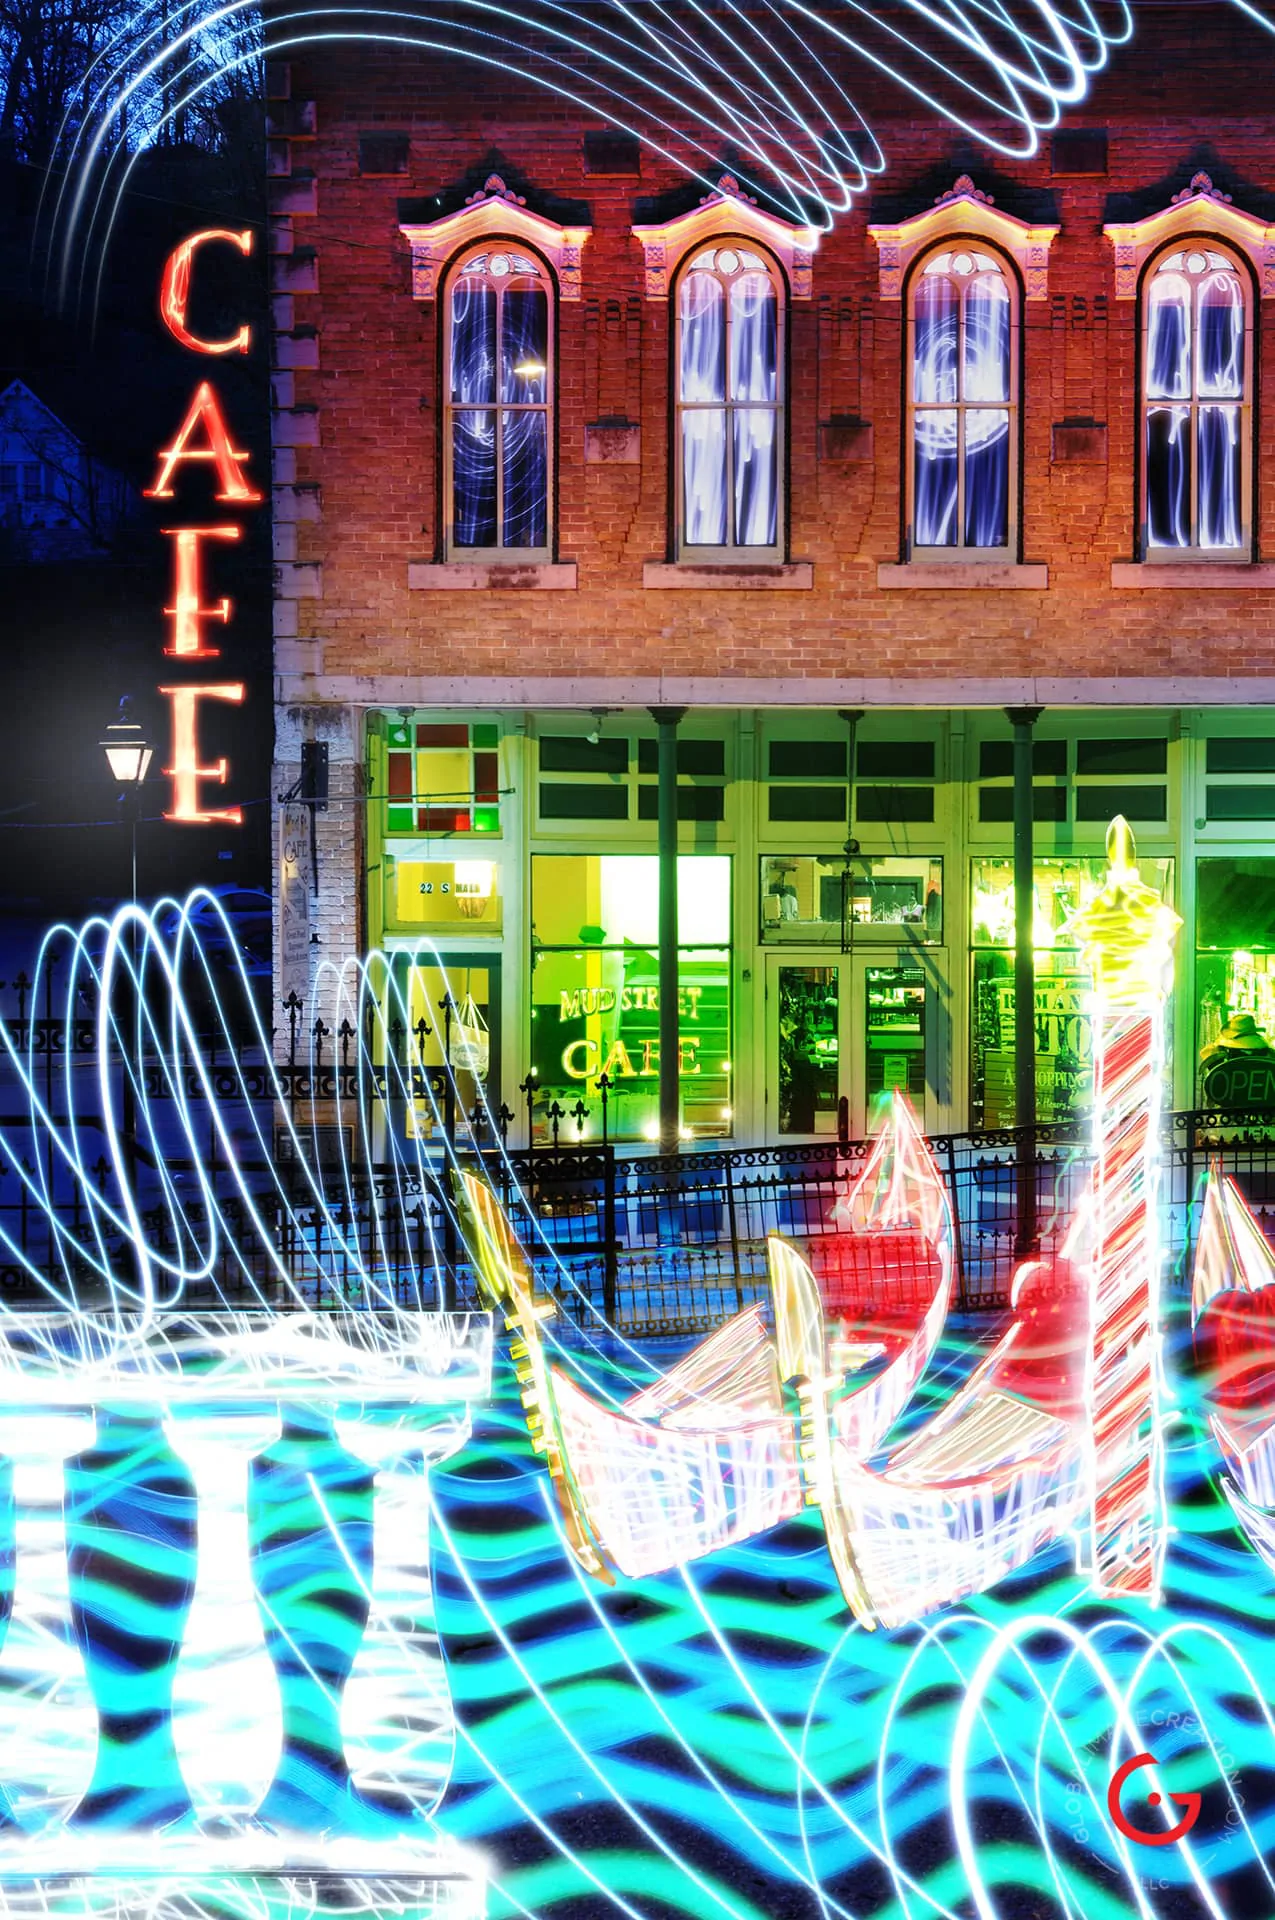 Venice Sights, Light Painting Photography from Public Art Project Electric Vision - Eureka Springs, Arkansas